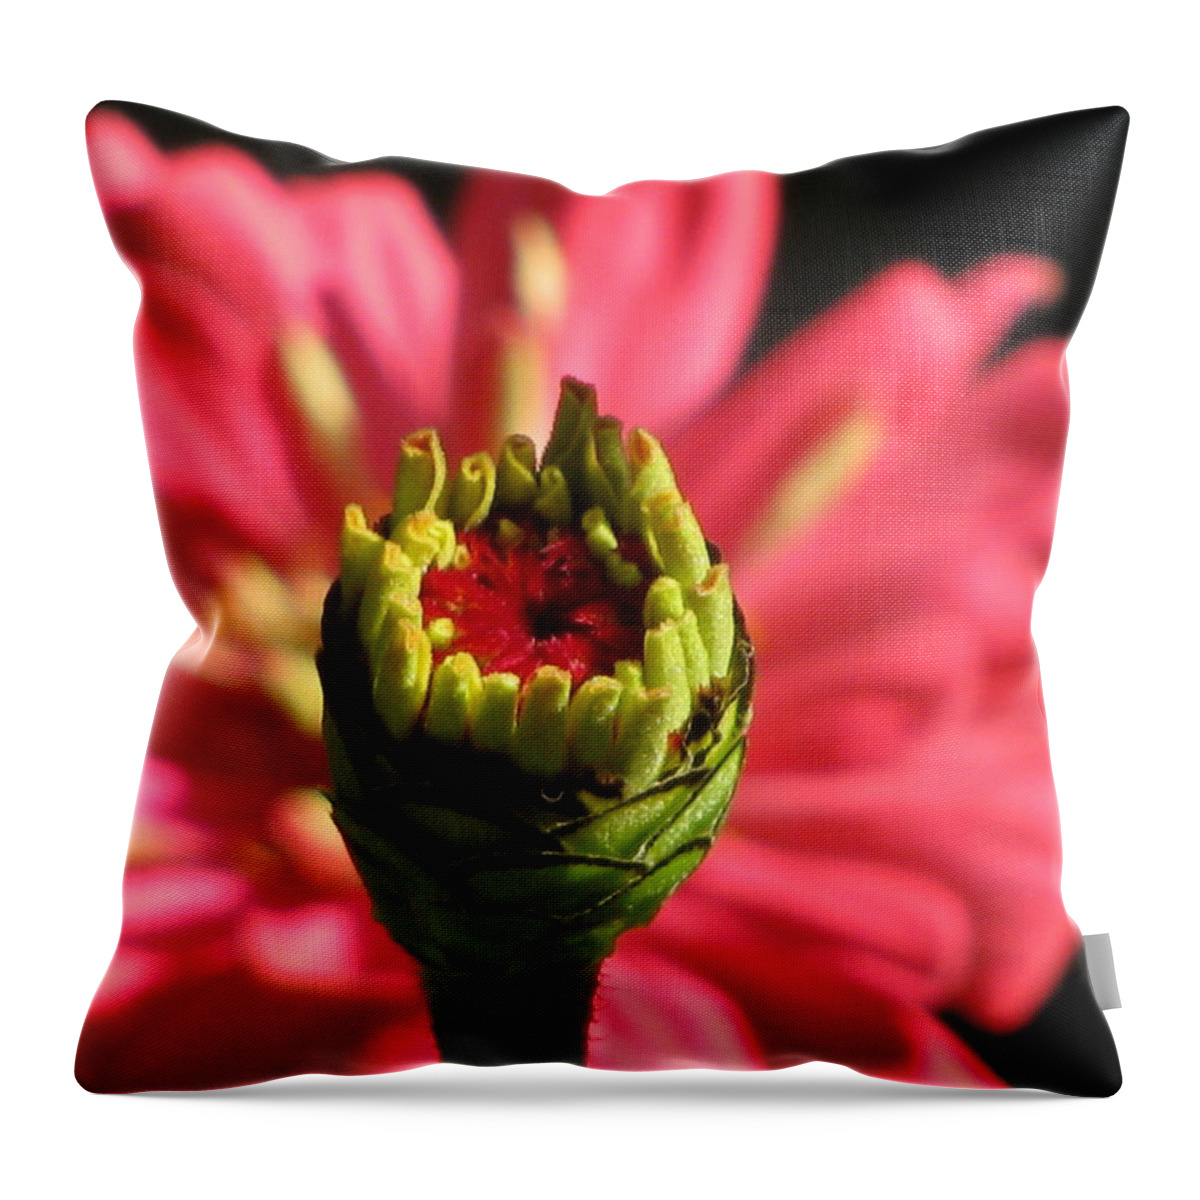 Zinnia Throw Pillow featuring the photograph The Future Infront Of You by Alfred Ng